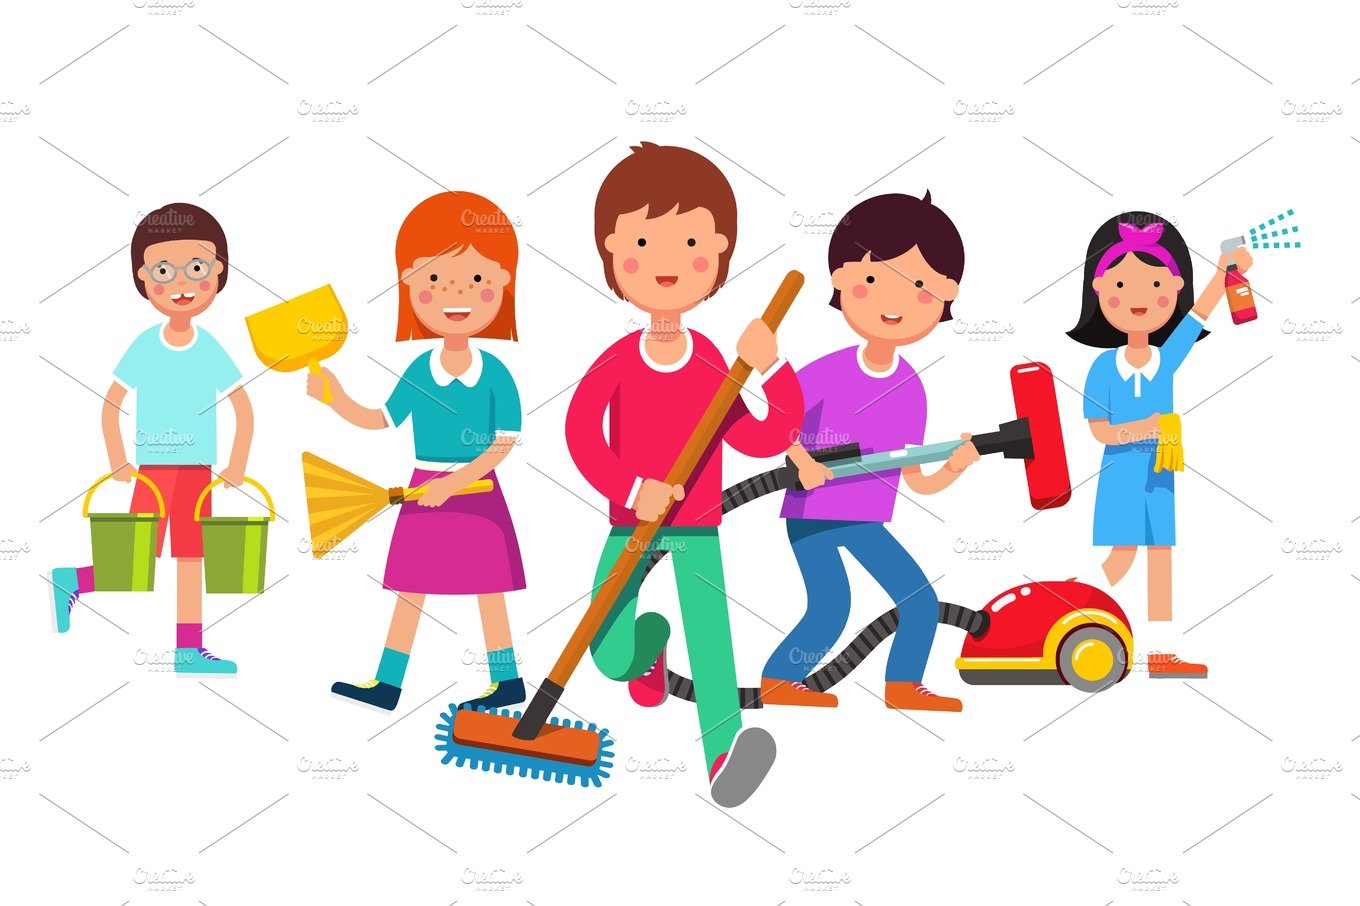 Kids cleaning team doing household chores cover image.